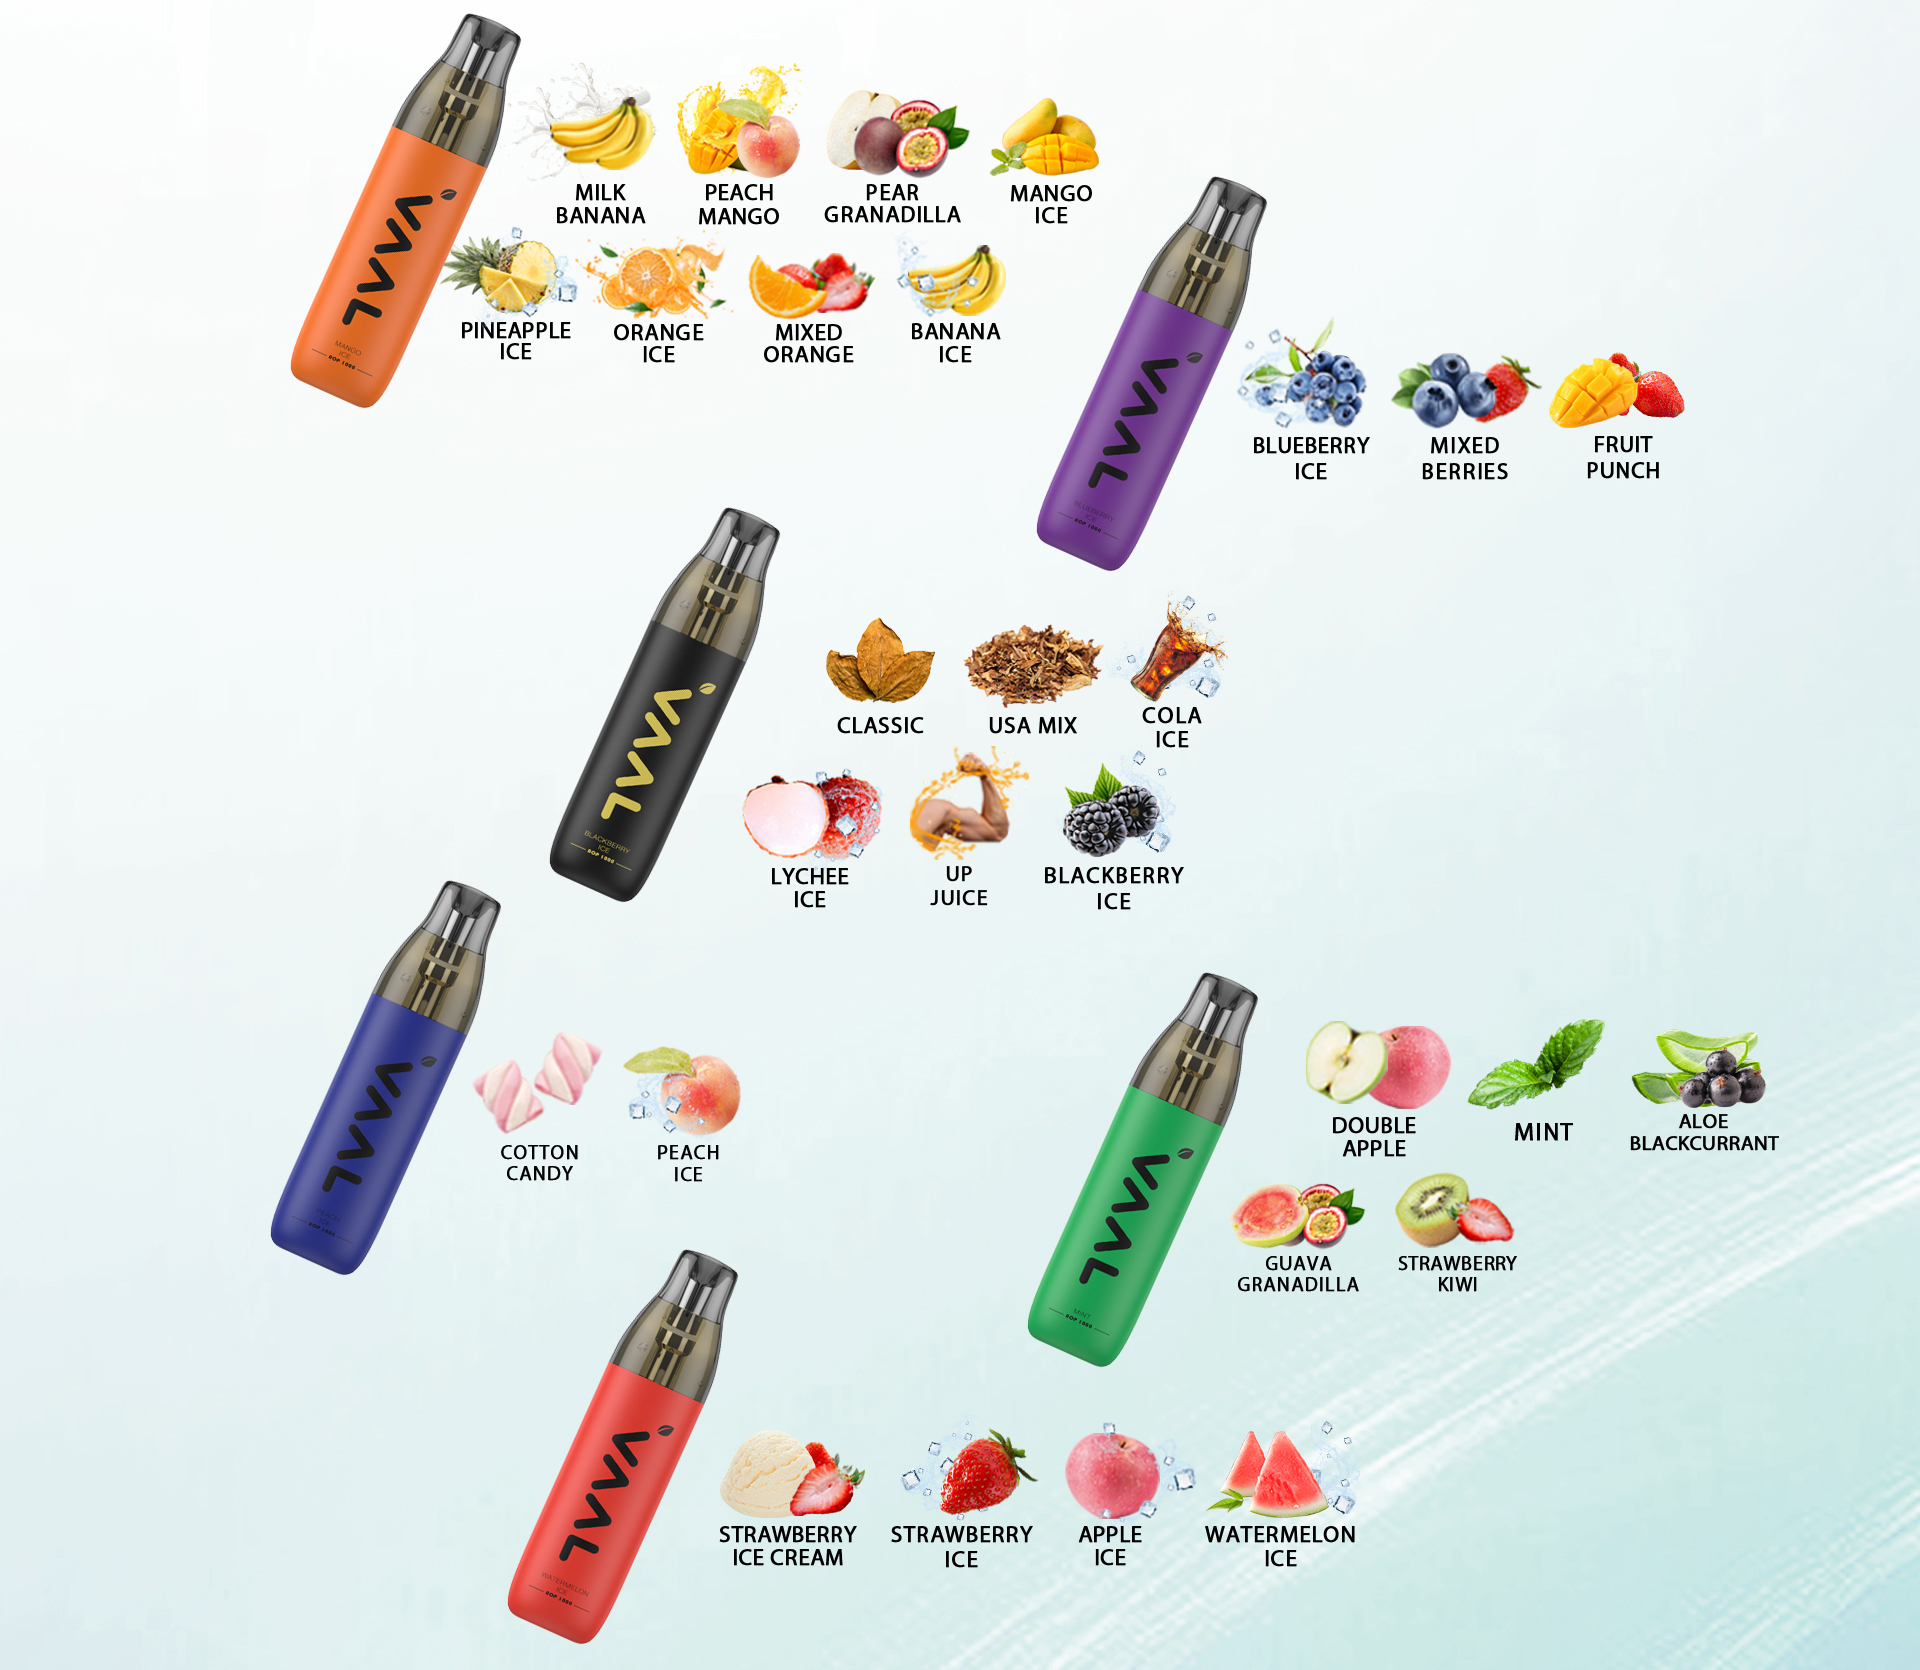 There are 28 flavors available with Vaal AOP1000, including Classic, Watermelon Ice, Mint, Blueberry Ice, Mango Ice, Peach Ice, Banana Ice, Cola Ice, Aloe Blackcurrant, Mixed Berries, Peach Mango, Pineapple Ice, Orange Ice, Up Juice, Strawberry Ice, Strawberry Kiwi, Mixed Orange, Strawberry Ice Cream, Cotton Candy, Milk Banana, Double Apple , Lychee Ice, Guava Granadilla, Fruit Punch, Blackberry Ice, Apple Ice, Pear Granadilla, and USA Mix